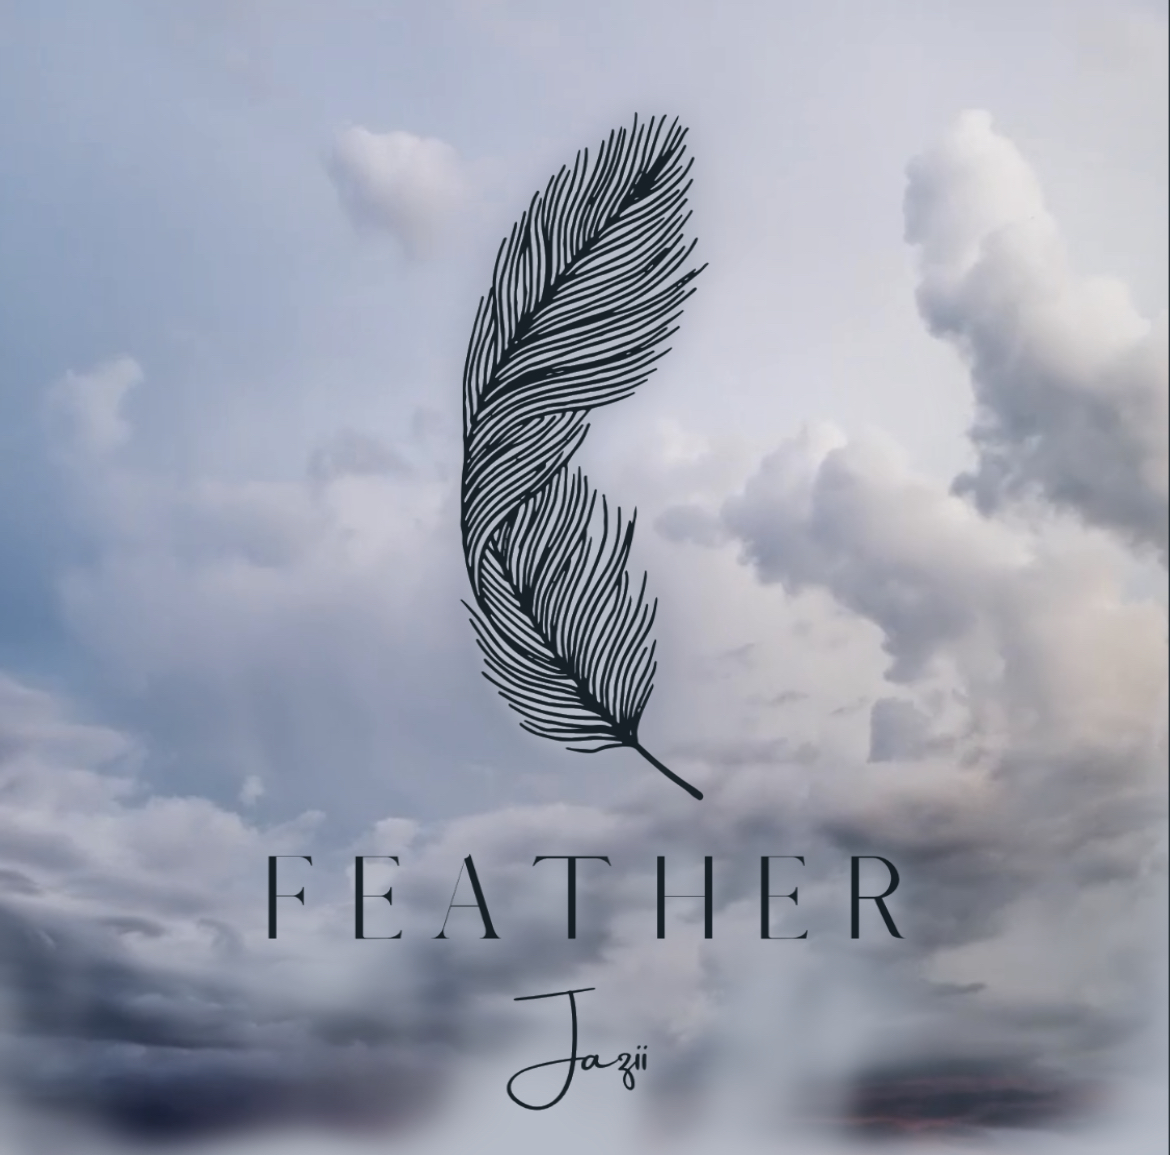 "Feather is an introspective narrative of the ups and downs of a relationship from a feminine perspective. It offers an interesting conversation from a side we don't often hear about."